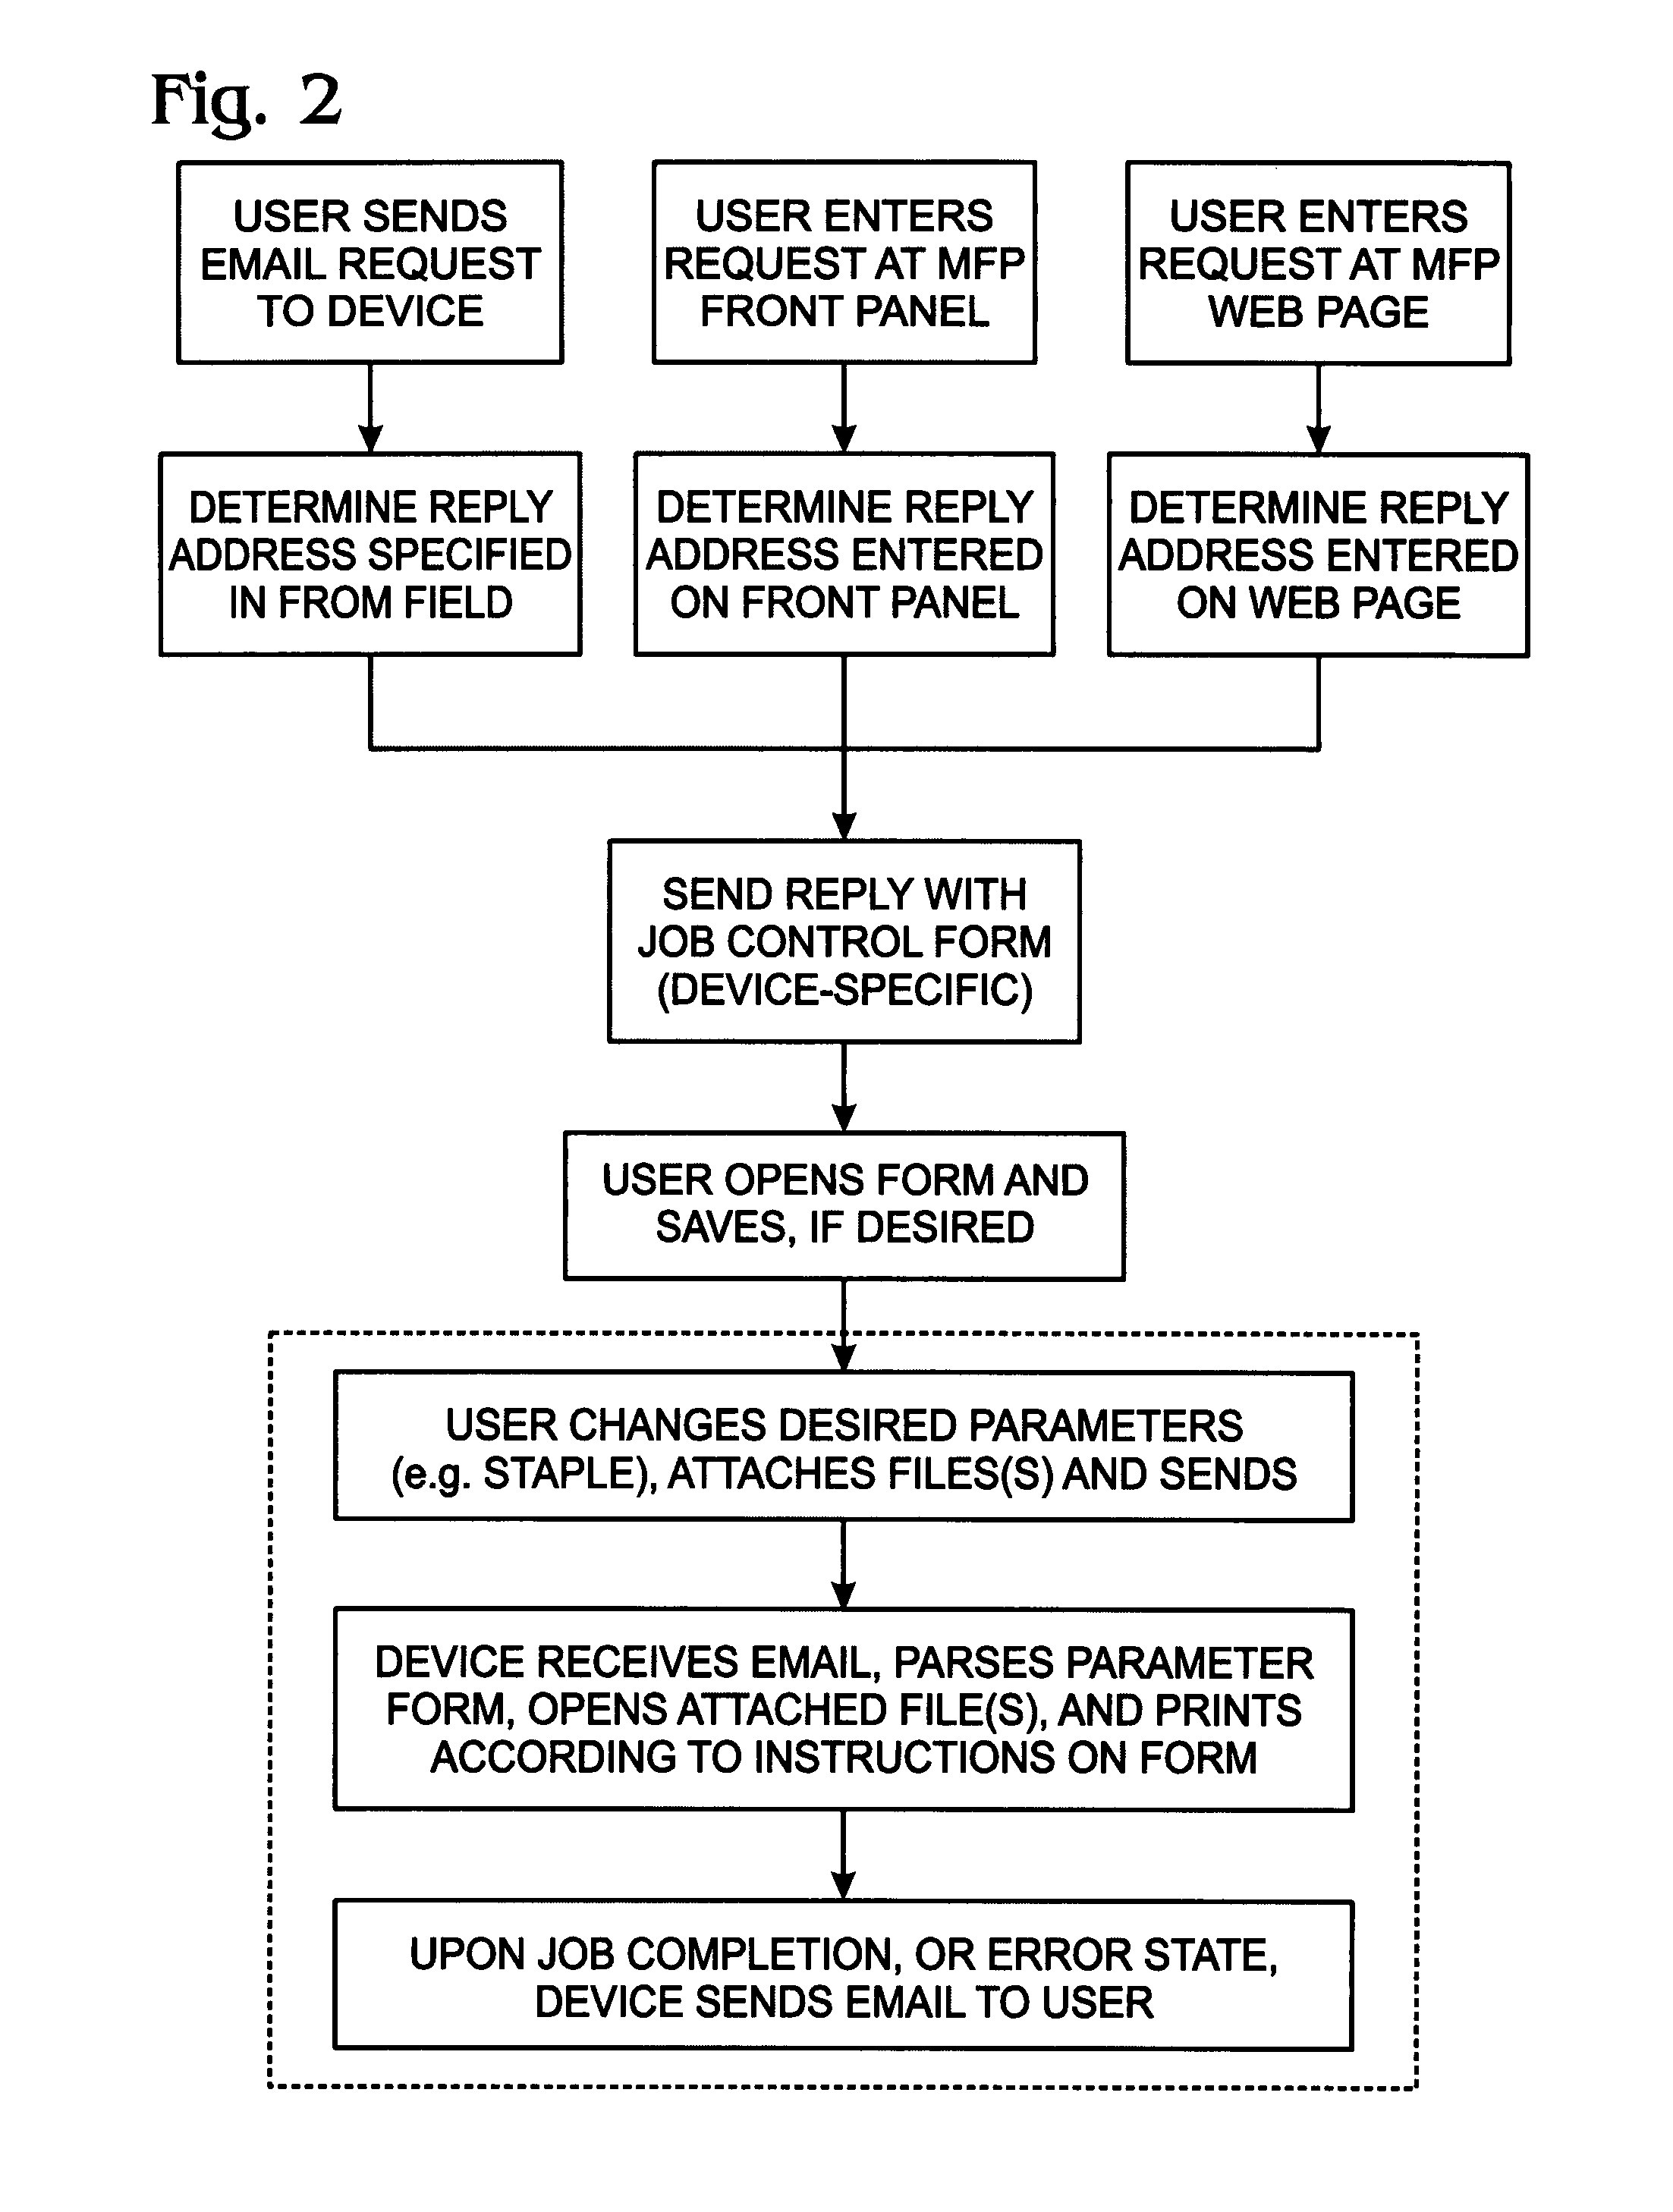 System and method for delivering native structure document printing instructions